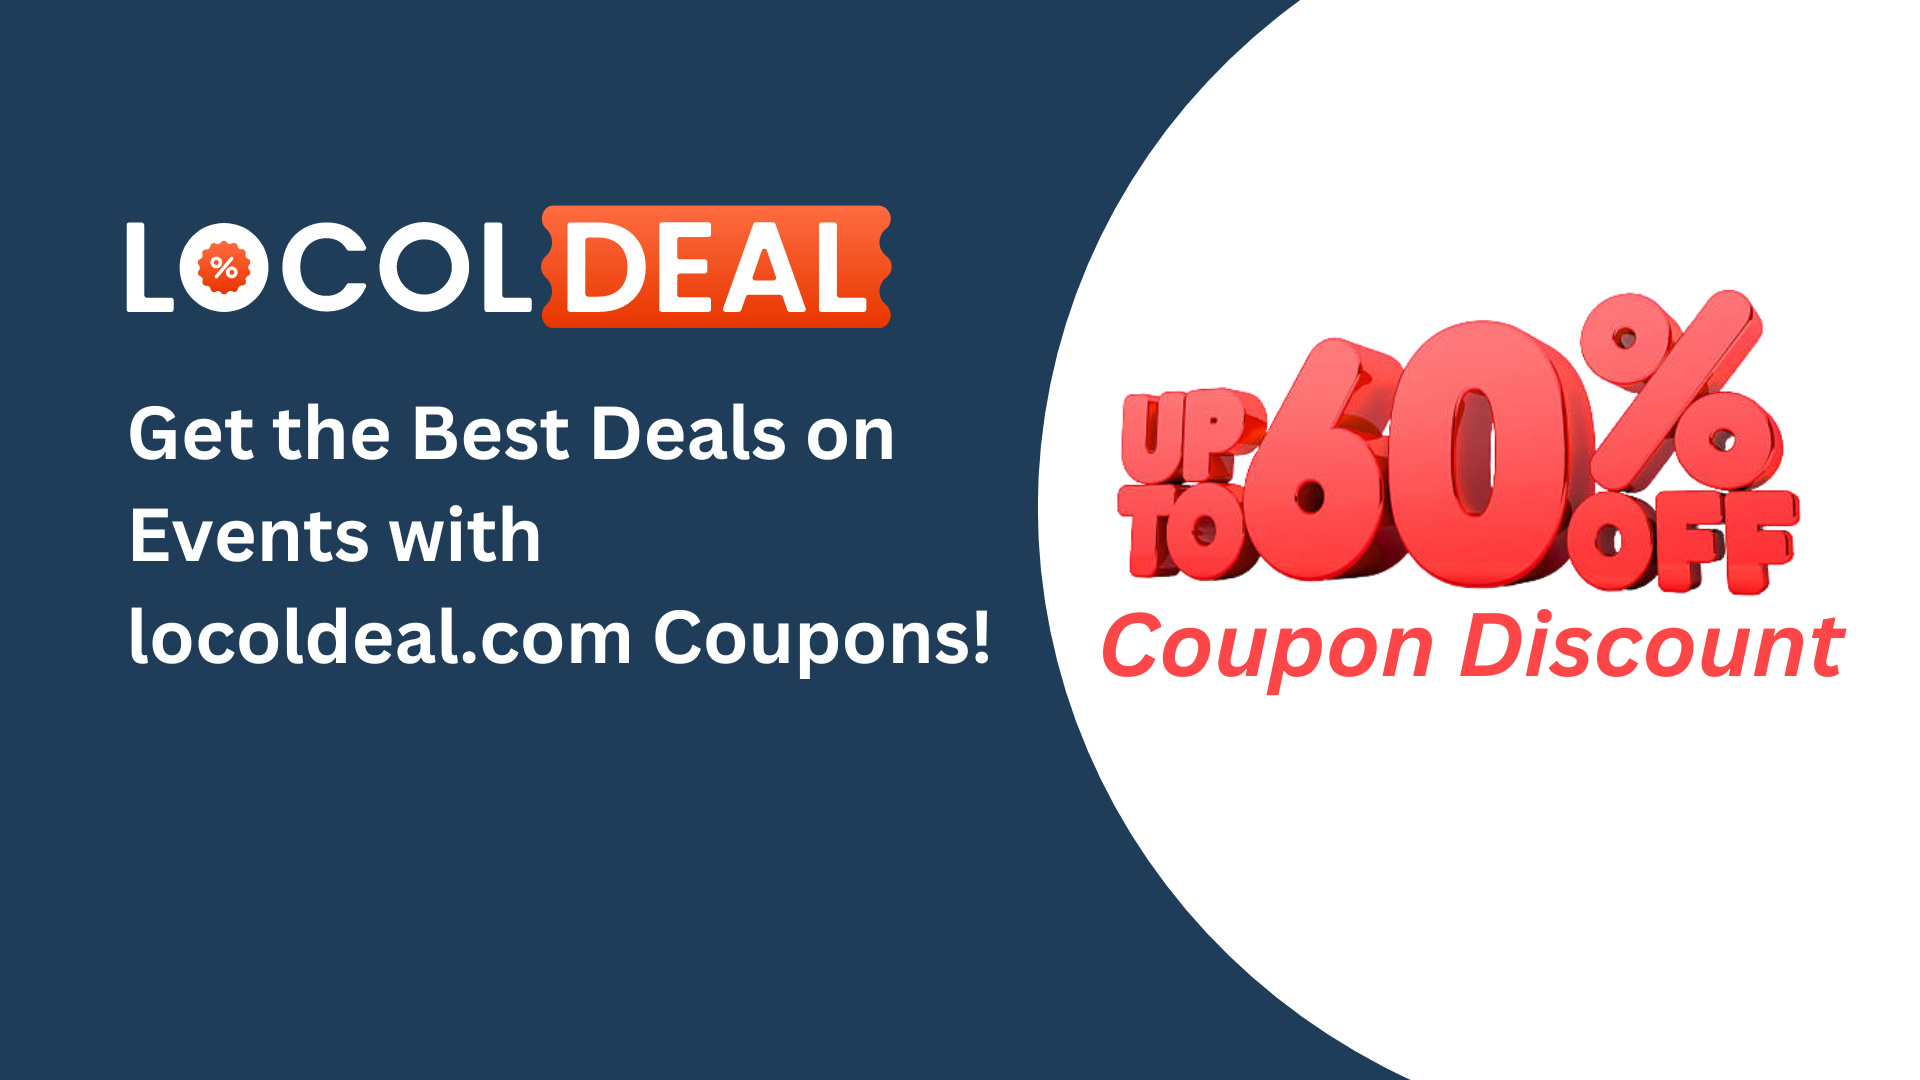 Get the Best Deals on Events with locoldeal.com Coupons!